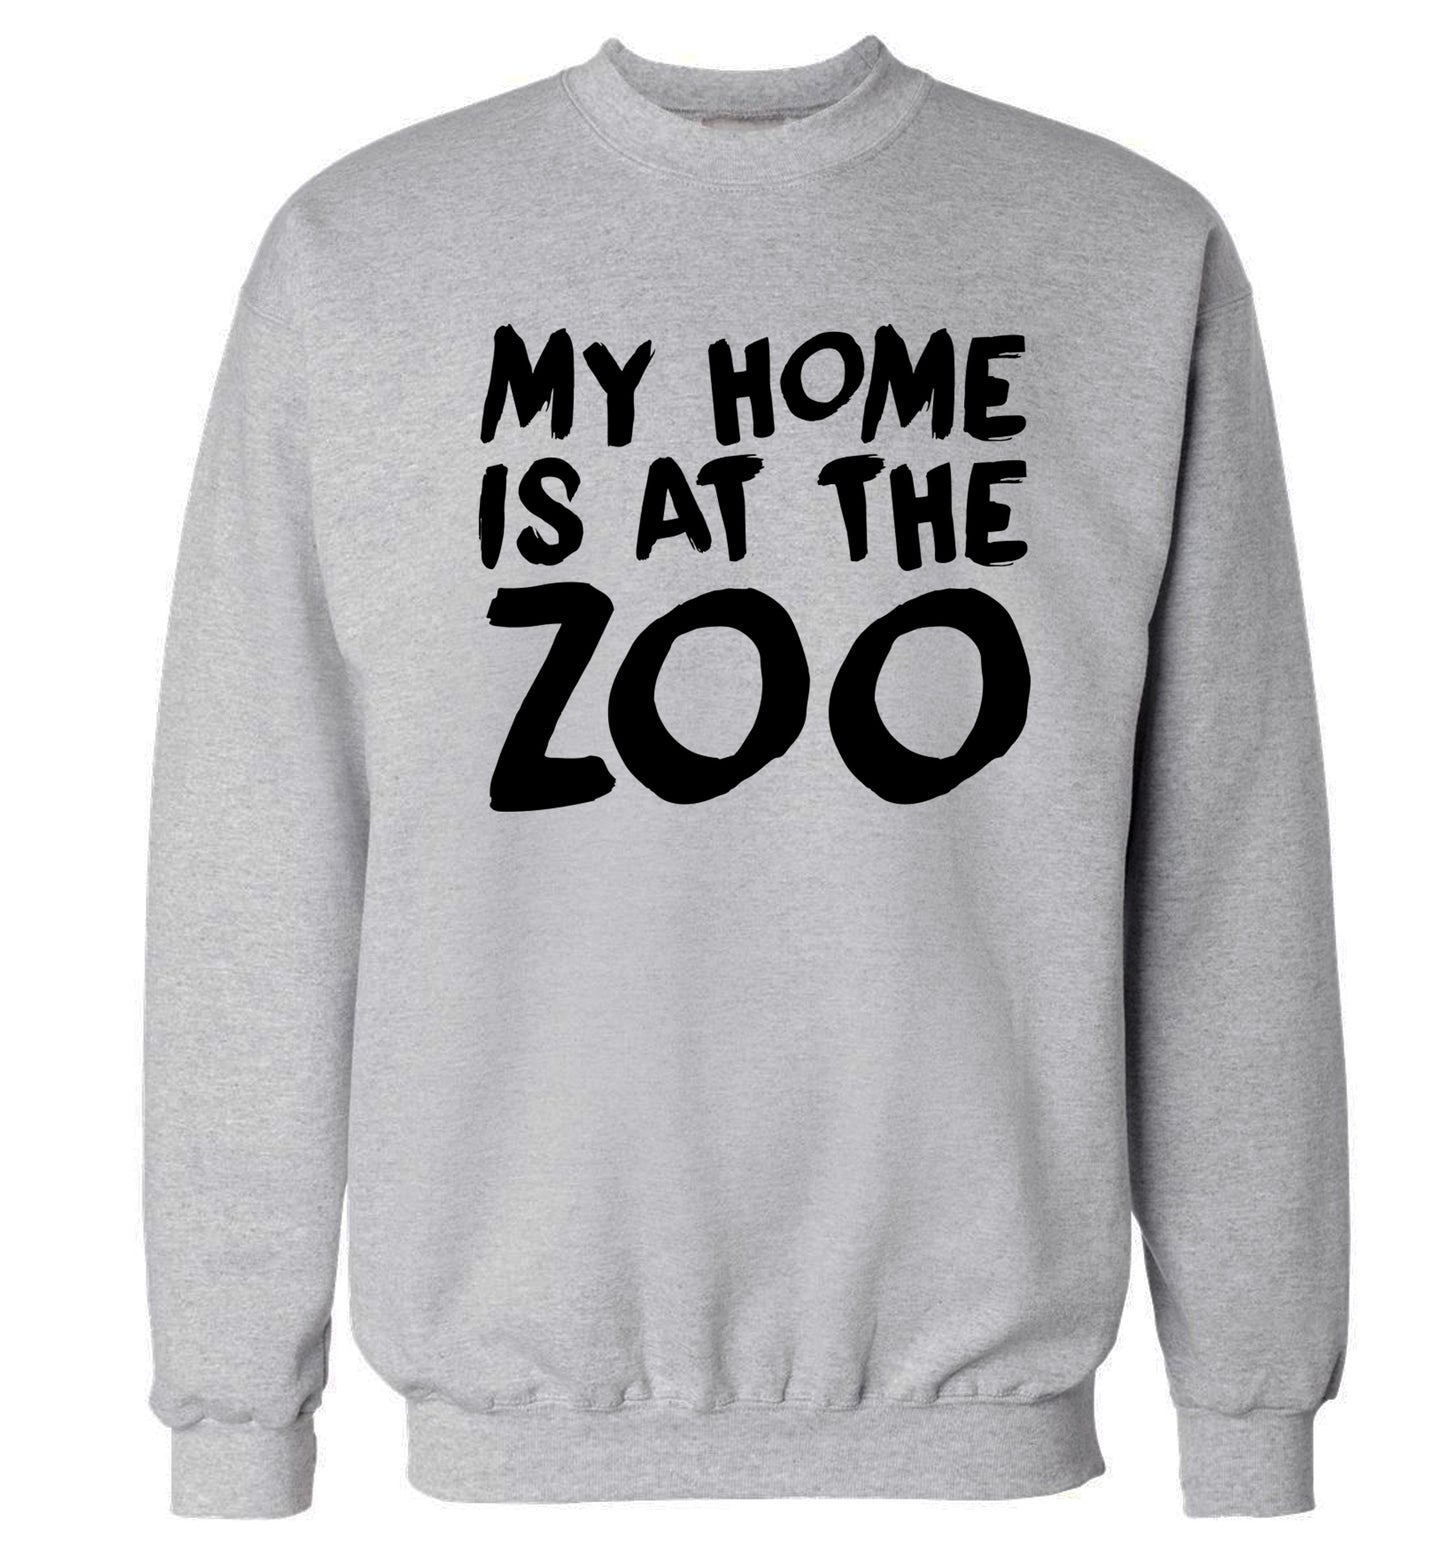 My home is at the zoo Adult's unisex grey Sweater 2XL